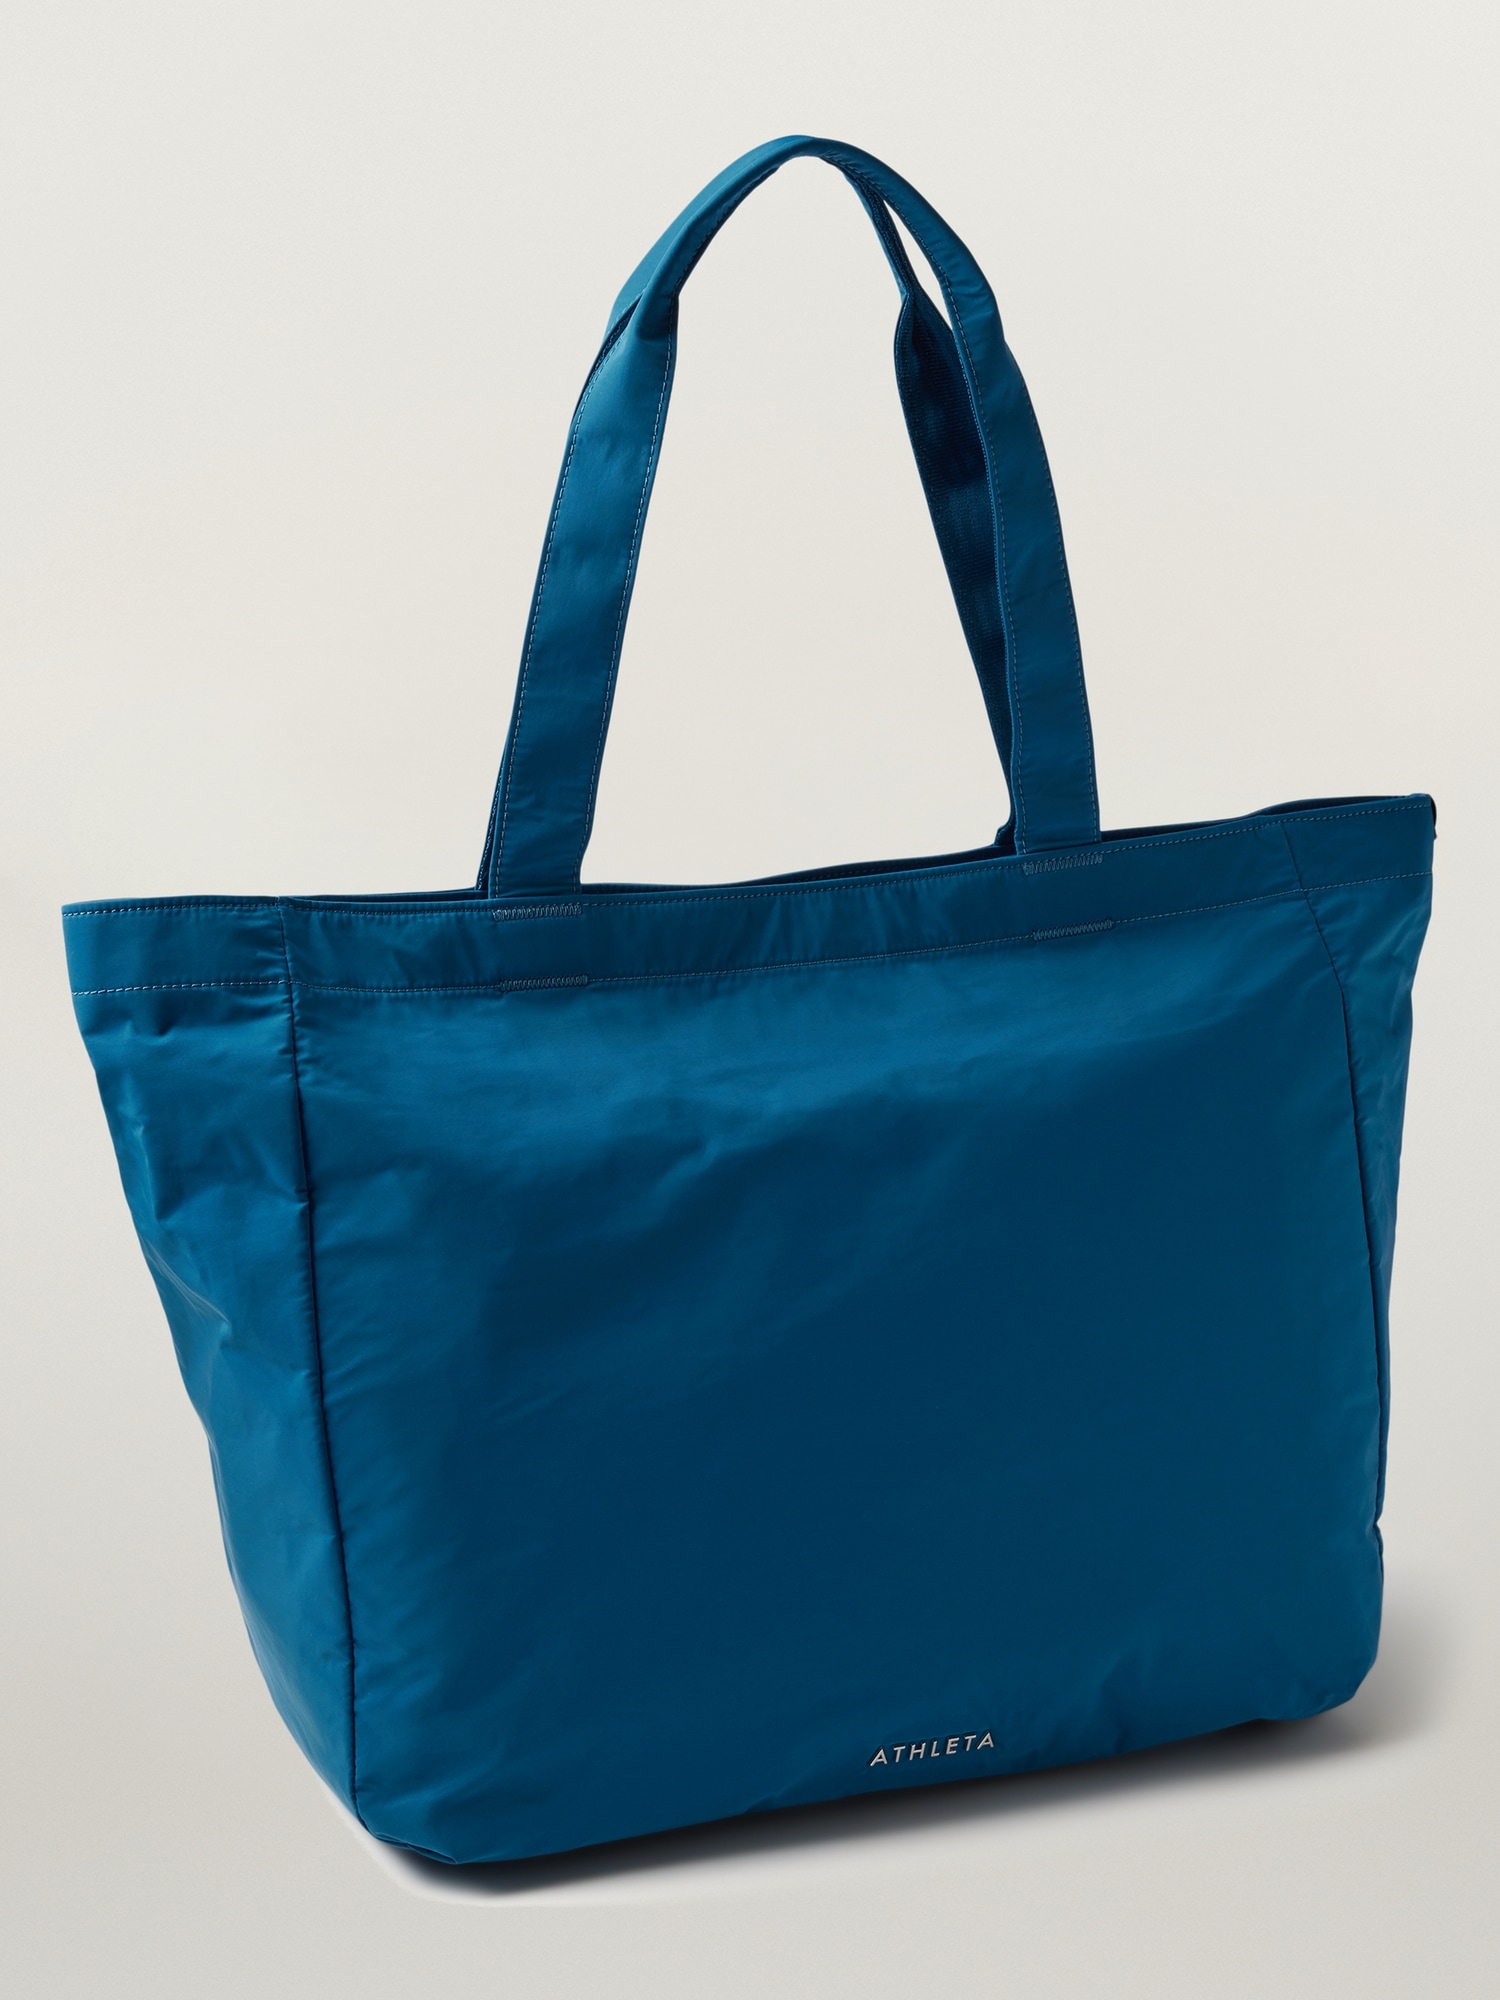 Athleta All About Tote Bag In Blue